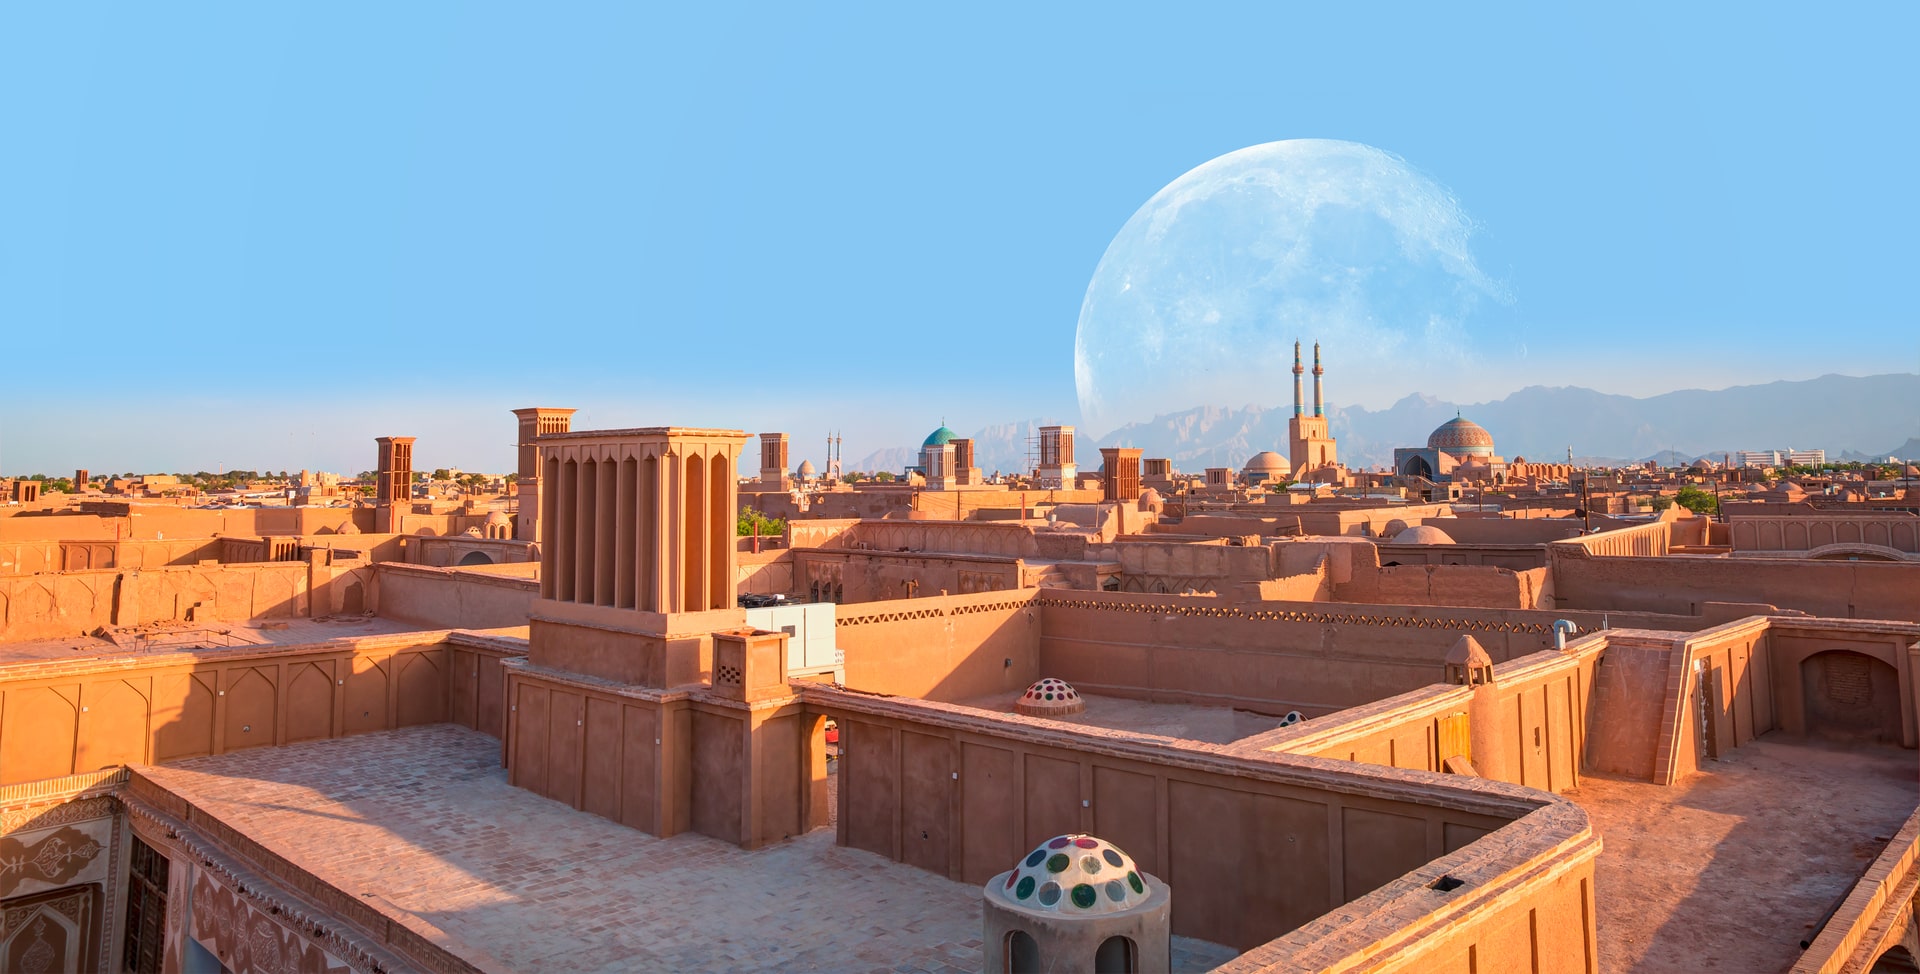 Be enchanted by Yazd's history, art, and desert scenery.